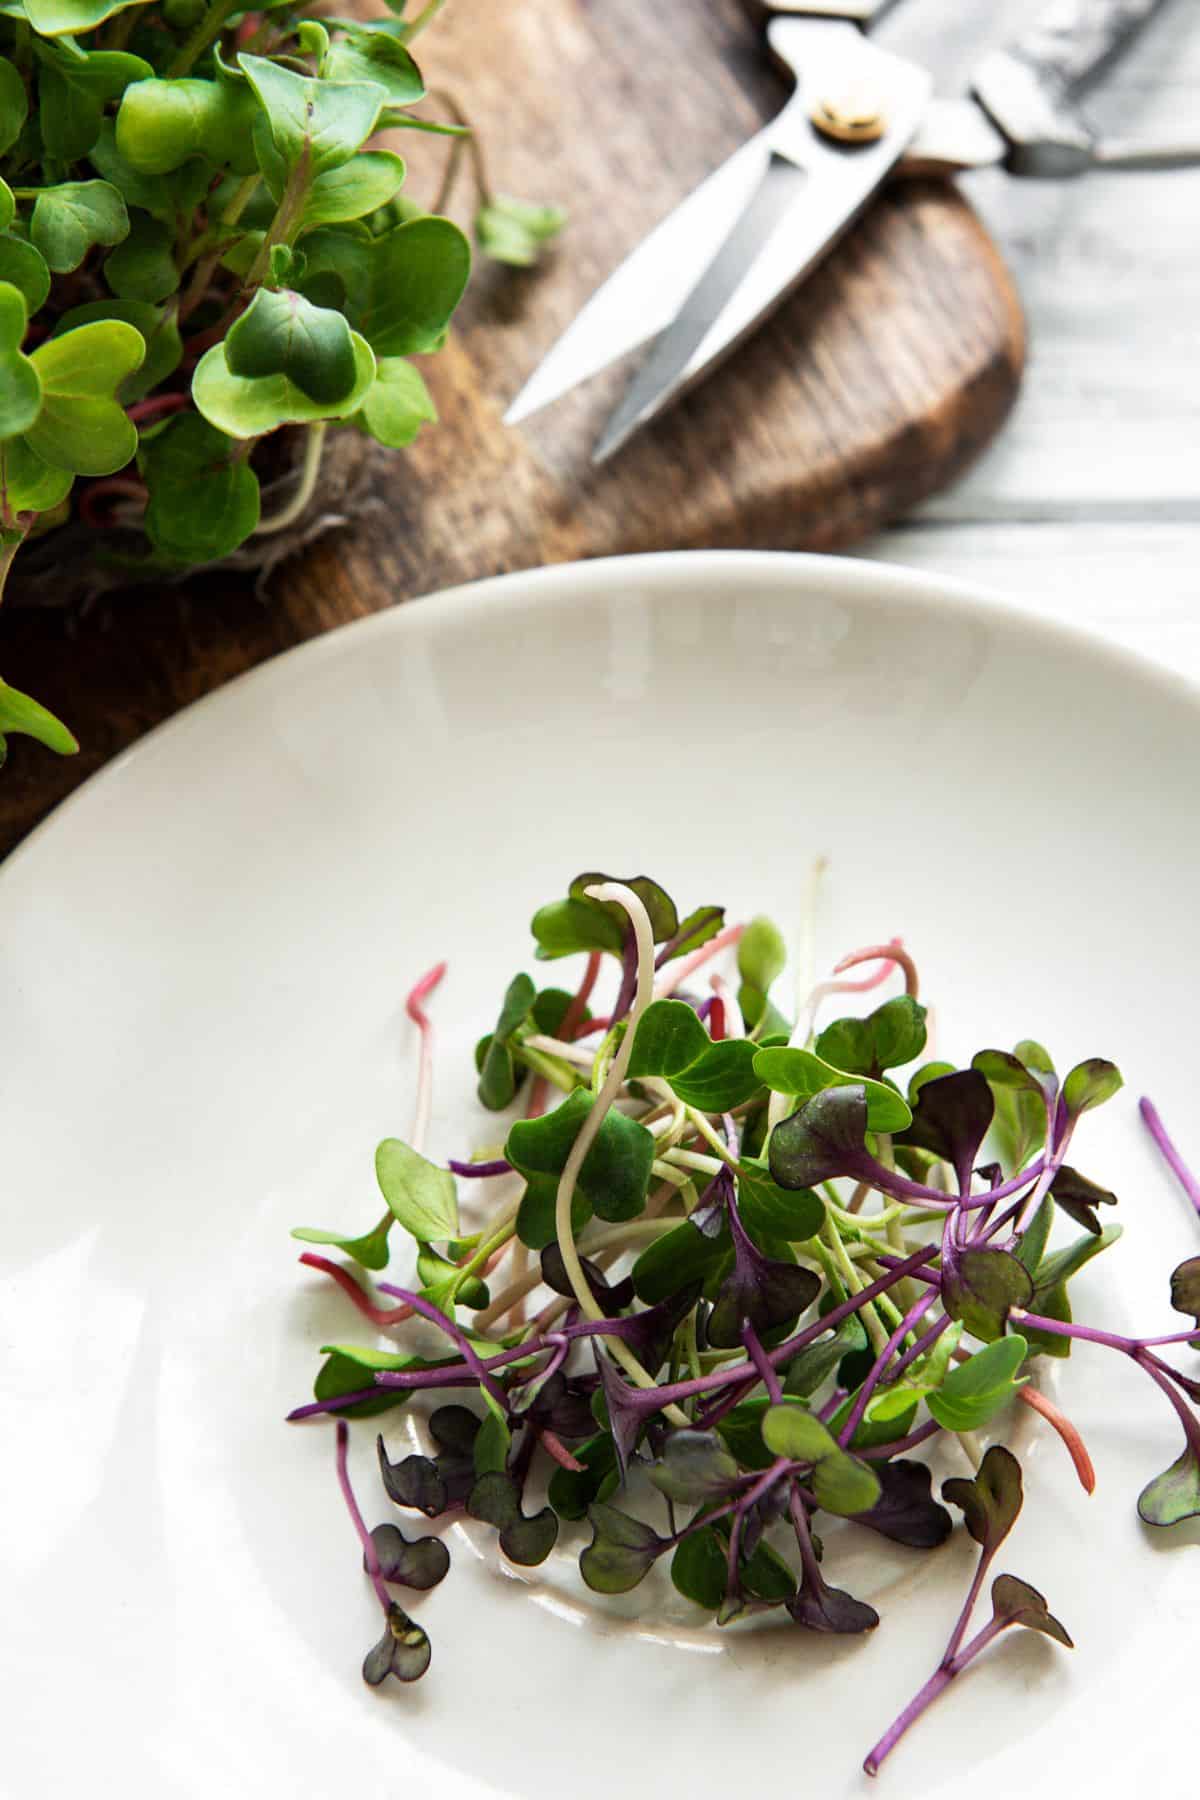 microgreens on a plate next to a pair of sheers.